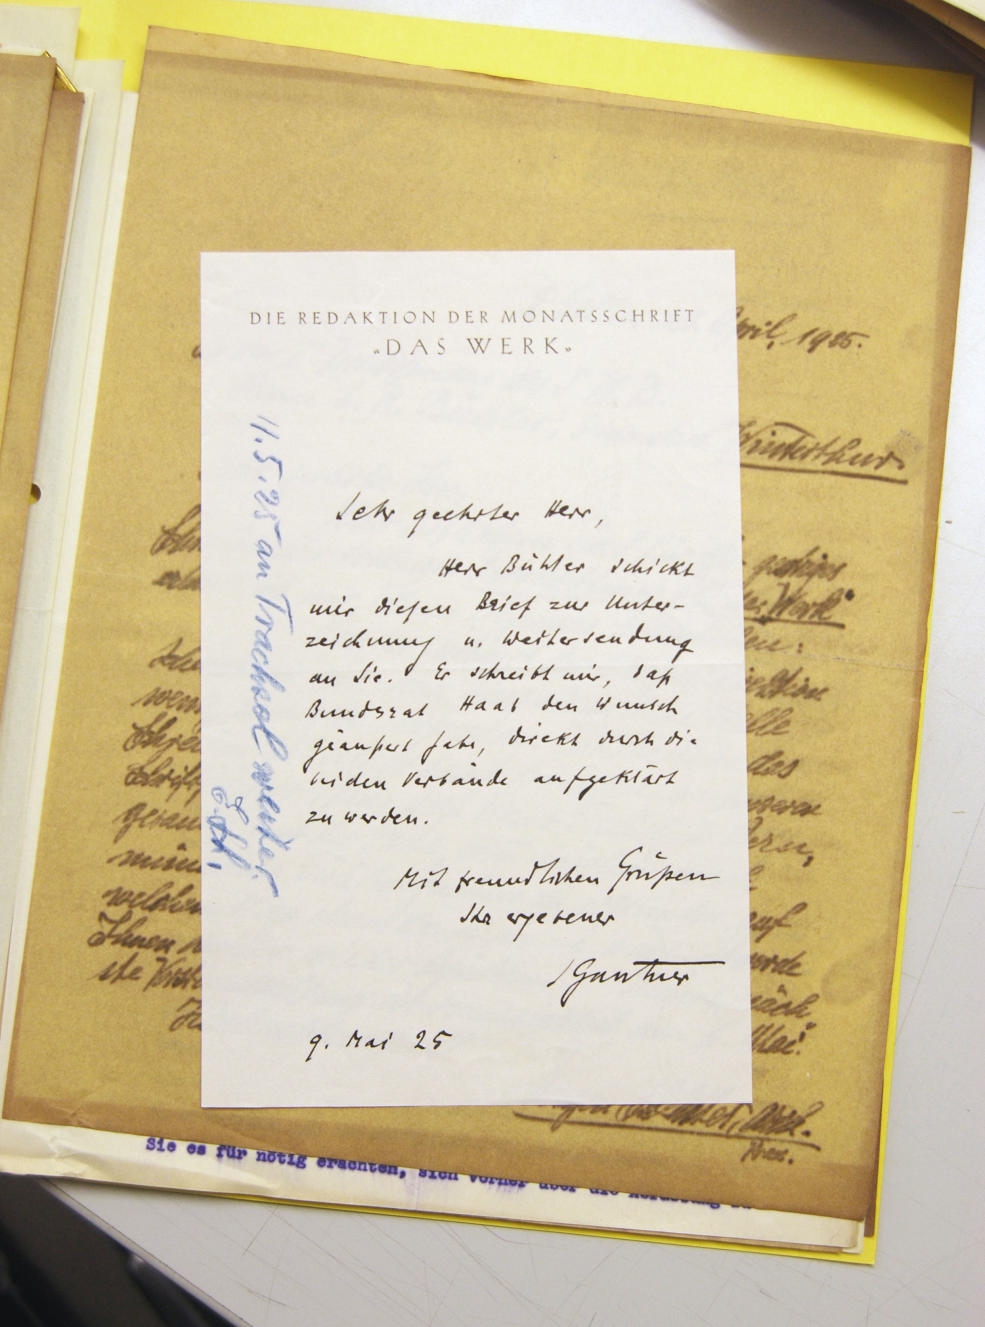 letters written by the editor Joseph Gantner in the archive of the gta institute, ETH Zurich